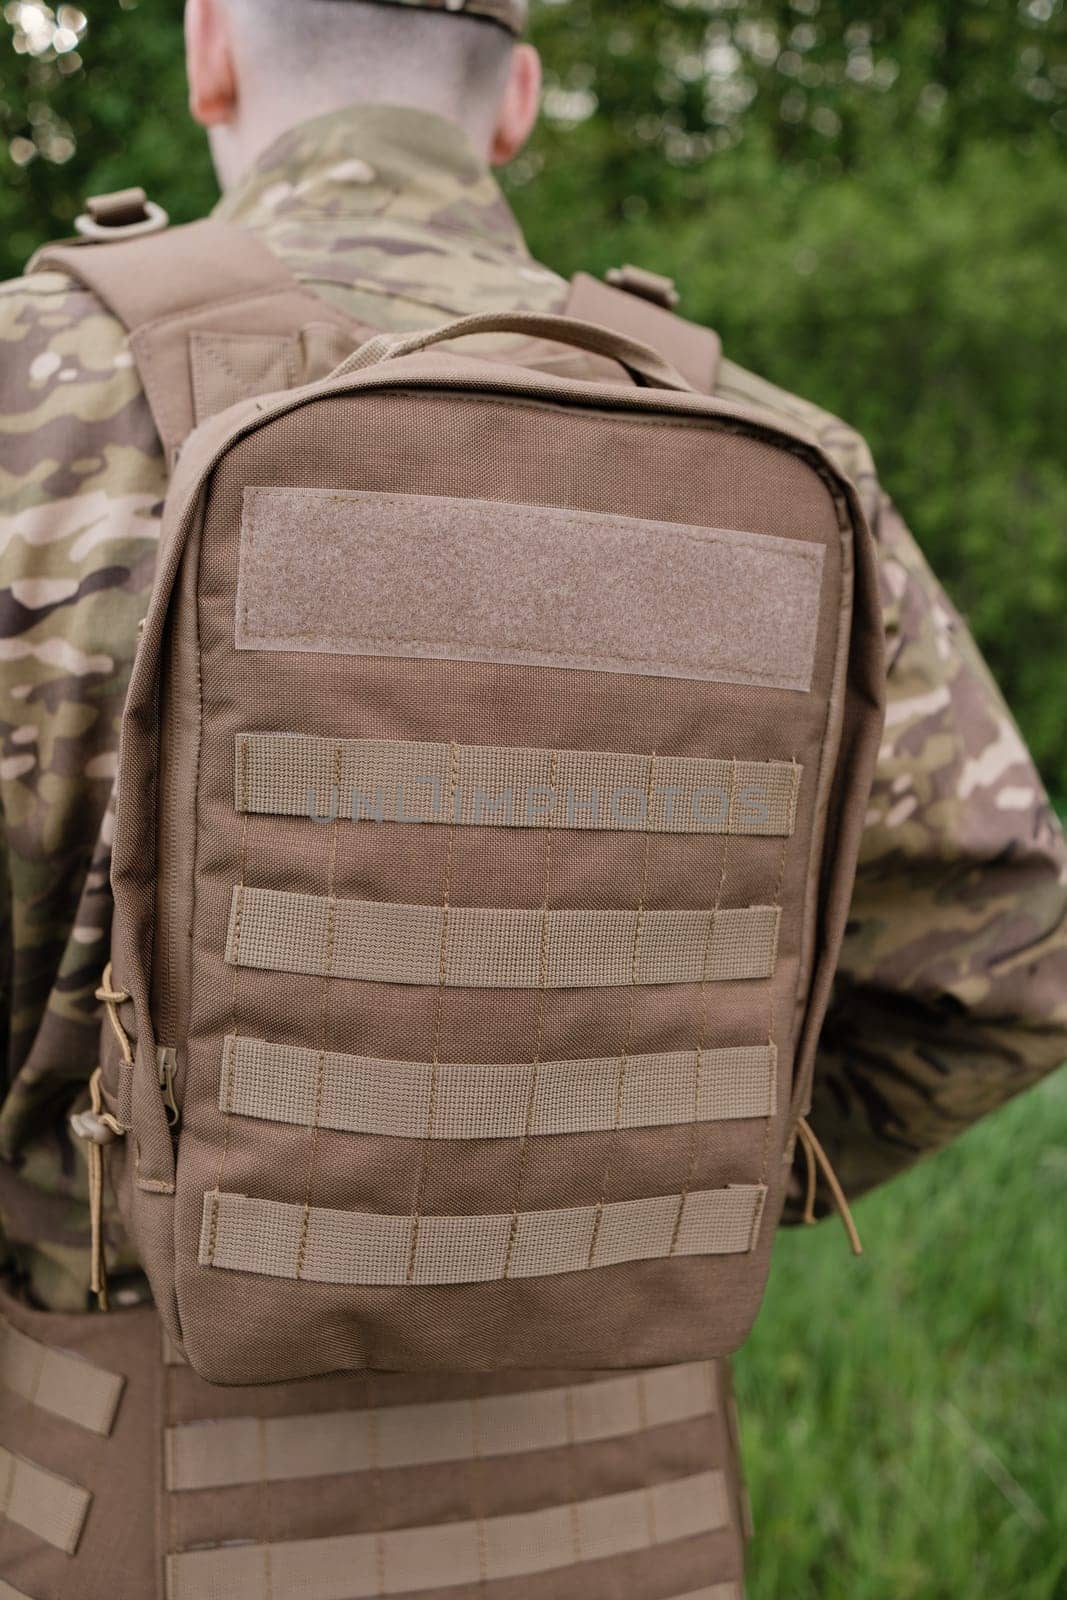 Close-up of Tactical Backpack Details on Soldier in Forest